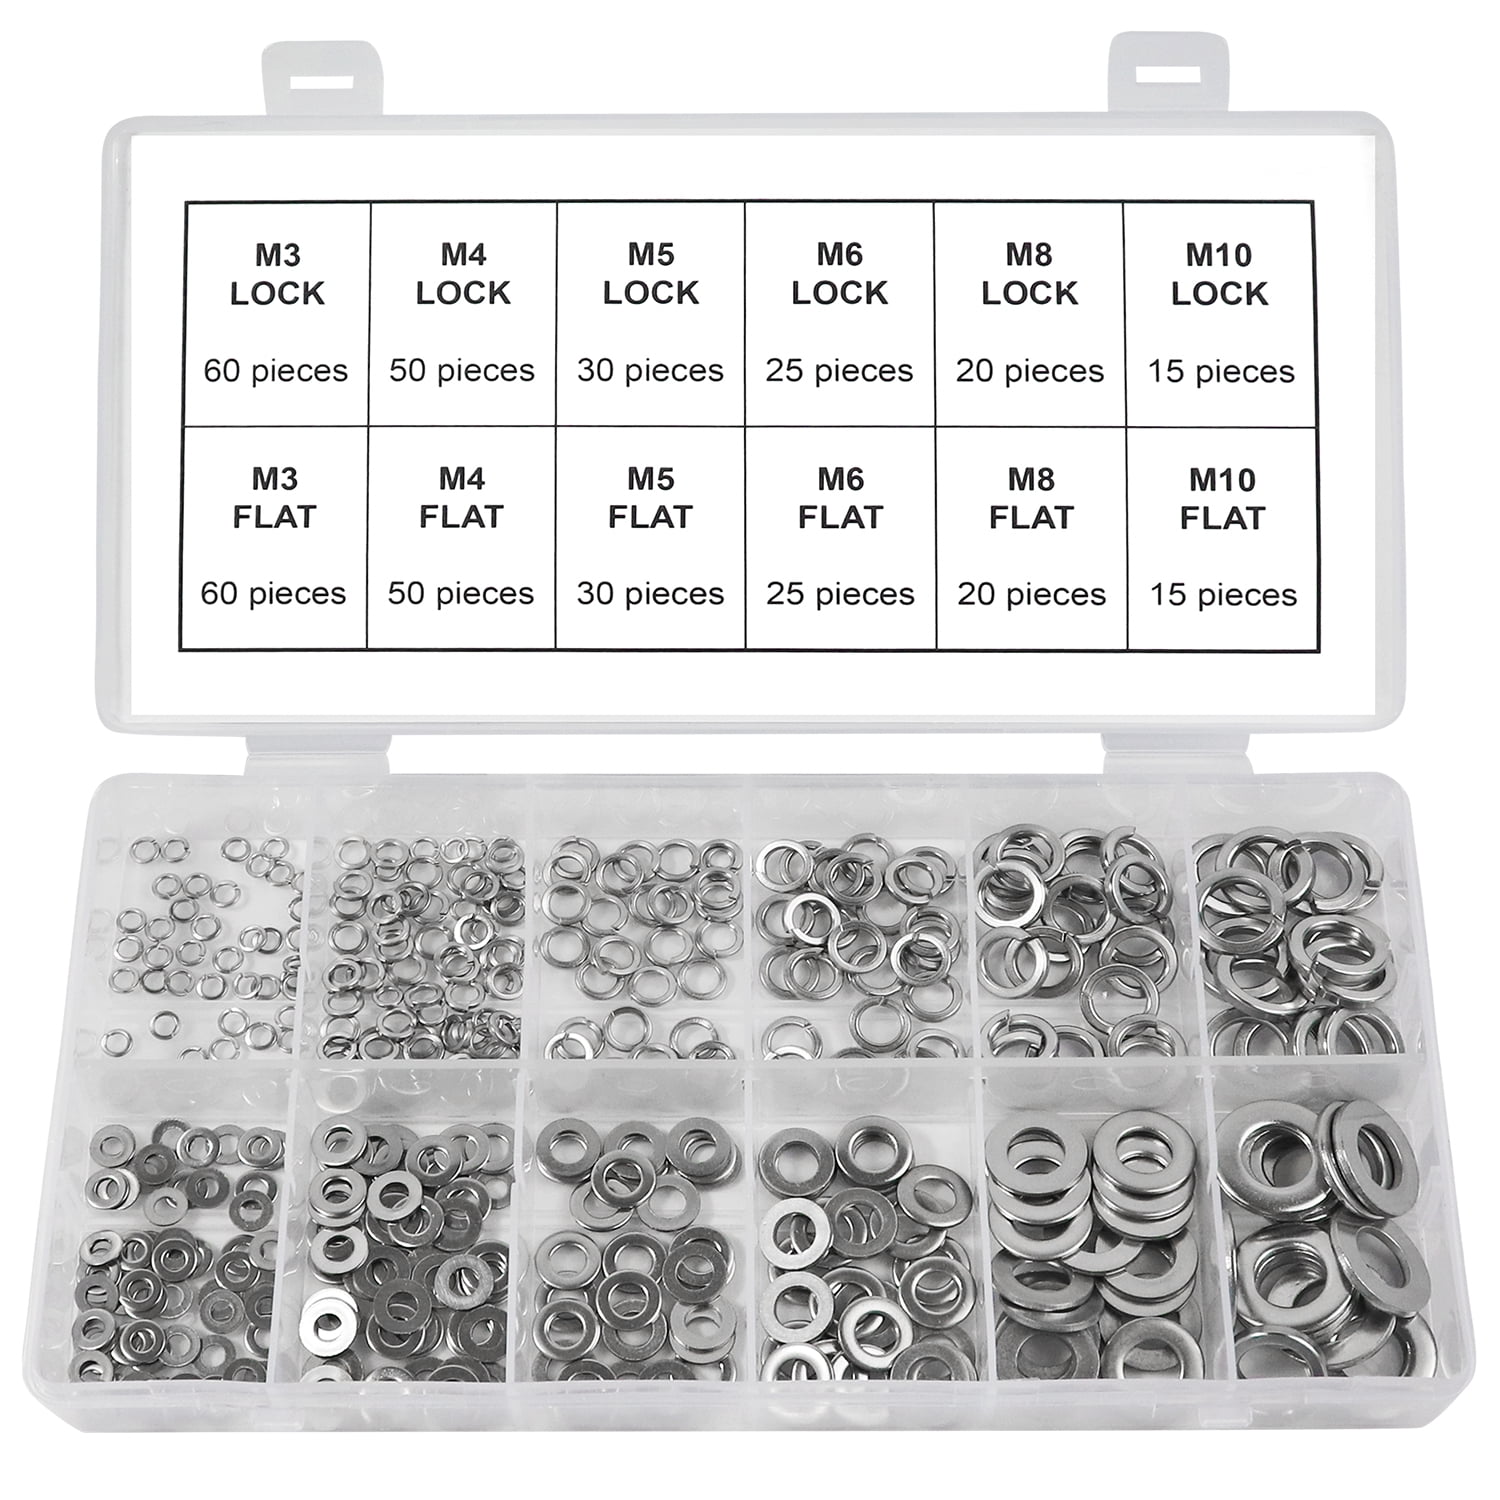 Yosawa 480-Pcs Professional Stainless Steel Flat Washers and Spring Lock Washers Assortment Kit for M2 3 4 5 6 8 Screws Bolt